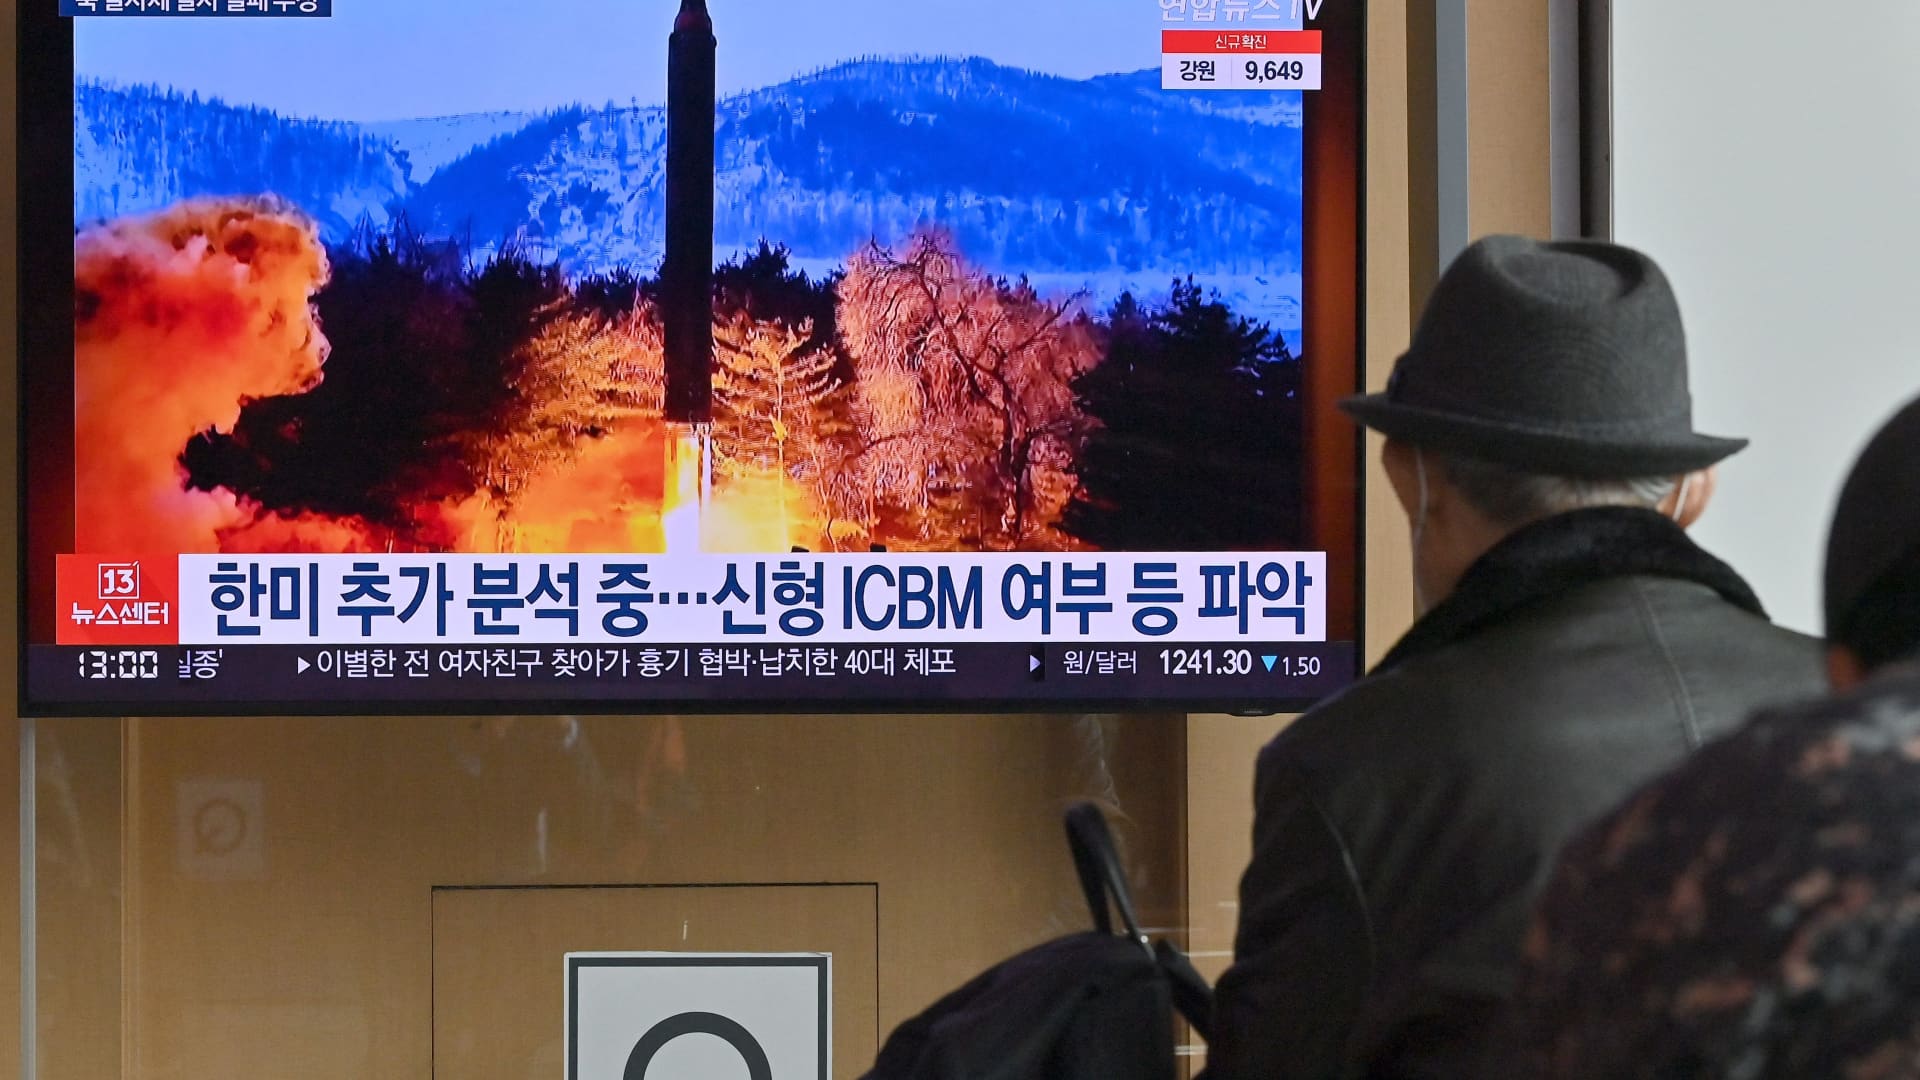 North Korea has likely tested a new type of intercontinental ballistic missile, Japan says